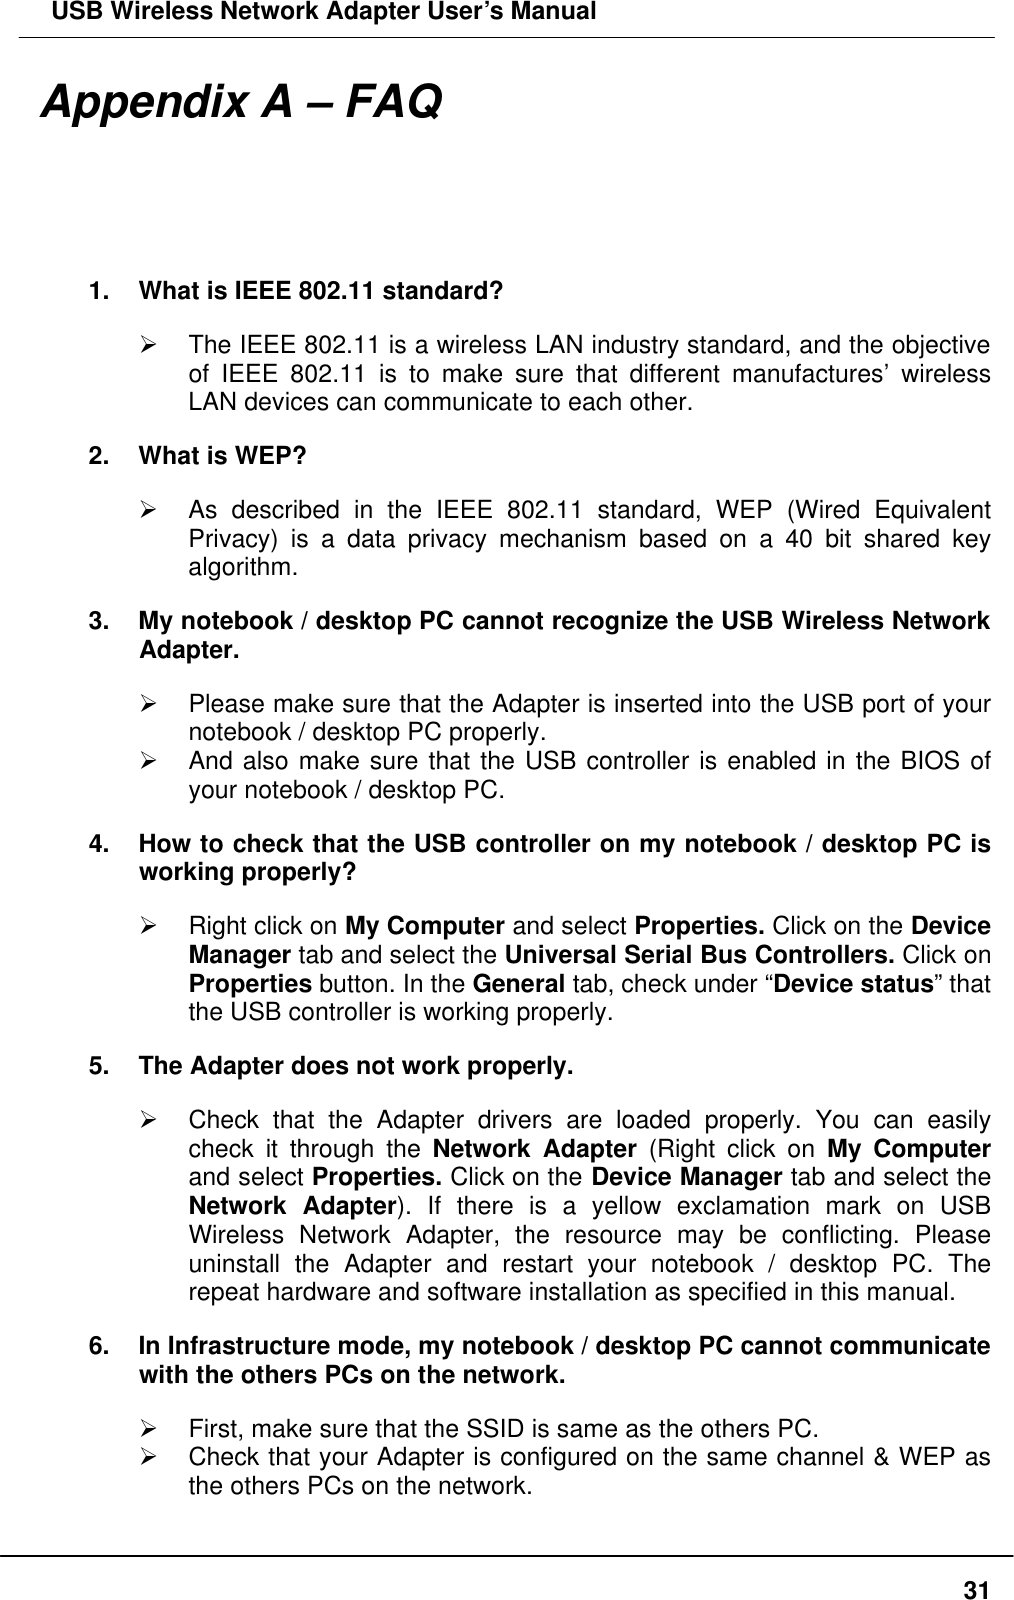  USB Wireless Network Adapter User’s Manual  31Appendix A – FAQ 1. What is IEEE 802.11 standard? Ø The IEEE 802.11 is a wireless LAN industry standard, and the objective of IEEE 802.11 is to make sure that different manufactures’ wireless LAN devices can communicate to each other. 2. What is WEP? Ø As described in the IEEE 802.11 standard, WEP (Wired Equivalent Privacy) is a data privacy mechanism based on a 40 bit shared key algorithm. 3. My notebook / desktop PC cannot recognize the USB Wireless Network Adapter. Ø Please make sure that the Adapter is inserted into the USB port of your notebook / desktop PC properly. Ø And also make sure that the USB controller is enabled in the BIOS of your notebook / desktop PC. 4. How to check that the USB controller on my notebook / desktop PC is working properly? Ø Right click on My Computer and select Properties. Click on the Device Manager tab and select the Universal Serial Bus Controllers. Click on Properties button. In the General tab, check under “Device status” that the USB controller is working properly. 5. The Adapter does not work properly. Ø Check that the Adapter drivers are loaded properly. You can easily check it  through the Network Adapter (Right click on My Computer and select Properties. Click on the Device Manager tab and select the Network Adapter). If there is a yellow exclamation mark on USB Wireless Network Adapter, the resource may be conflicting. Please uninstall the Adapter and restart your notebook / desktop PC. The repeat hardware and software installation as specified in this manual.   6. In Infrastructure mode, my notebook / desktop PC cannot communicate with the others PCs on the network.   Ø First, make sure that the SSID is same as the others PC. Ø Check that your Adapter is configured on the same channel &amp; WEP as the others PCs on the network. 